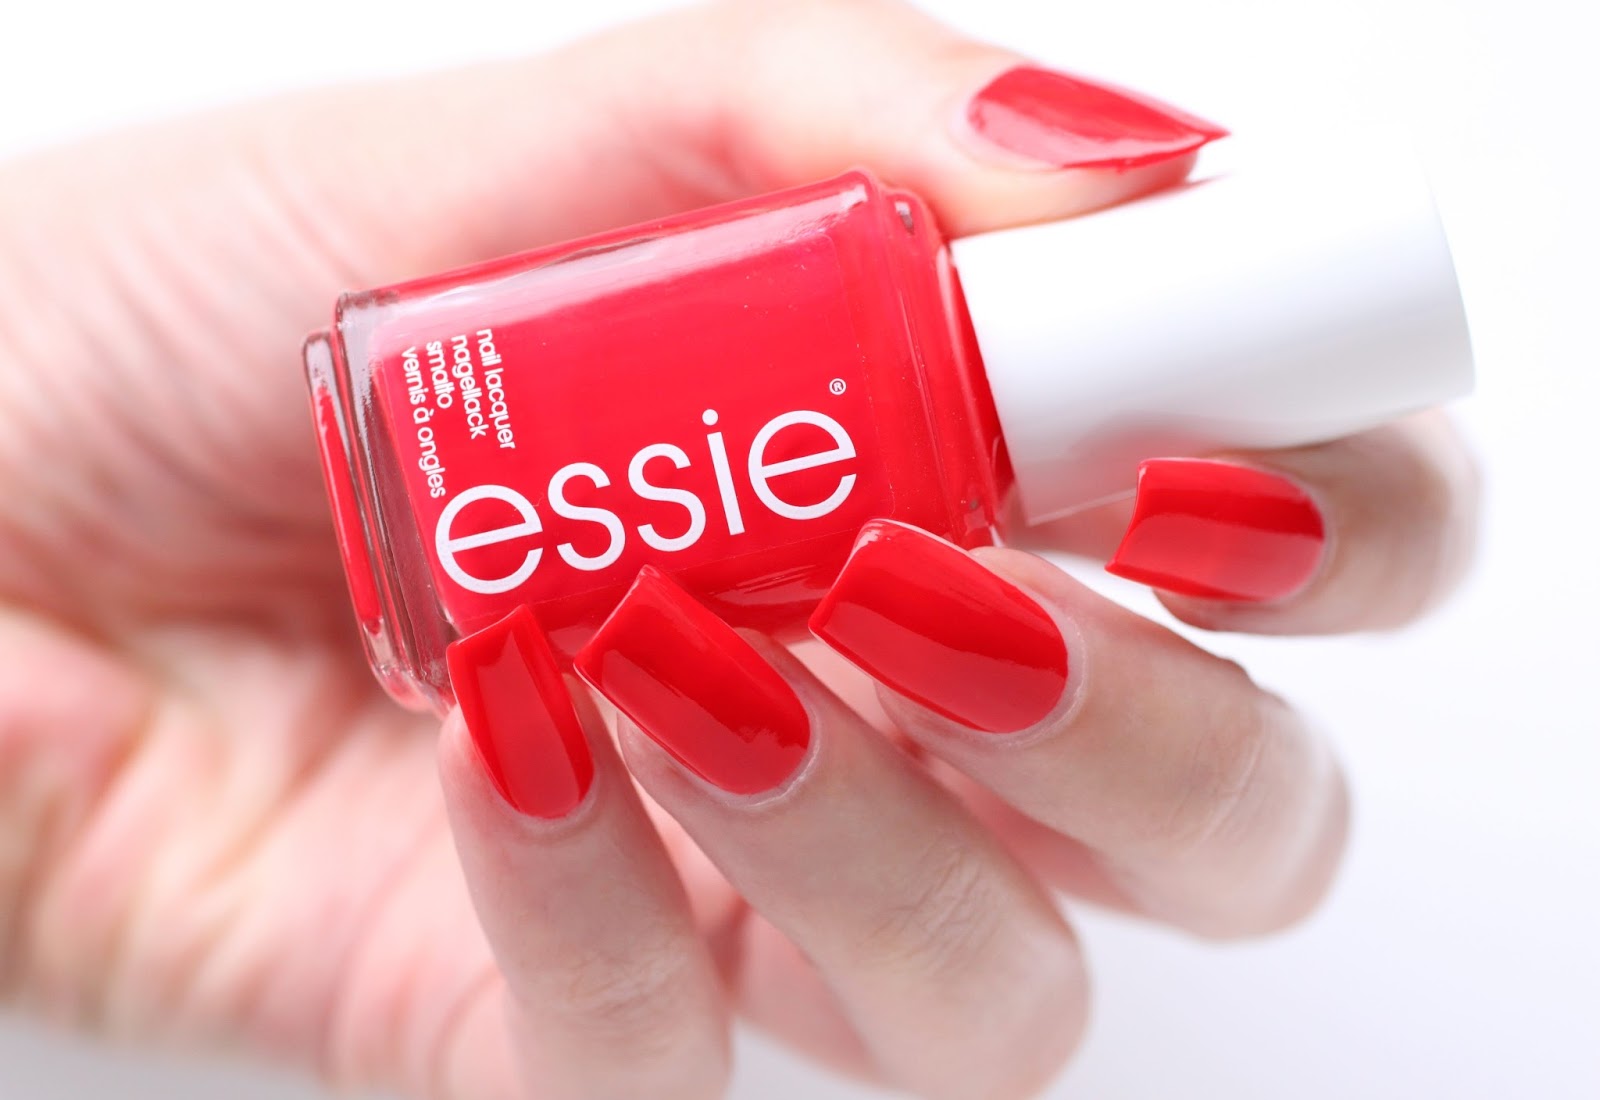 1. Essie Gel Couture Nail Polish in "Rock the Runway" - wide 8